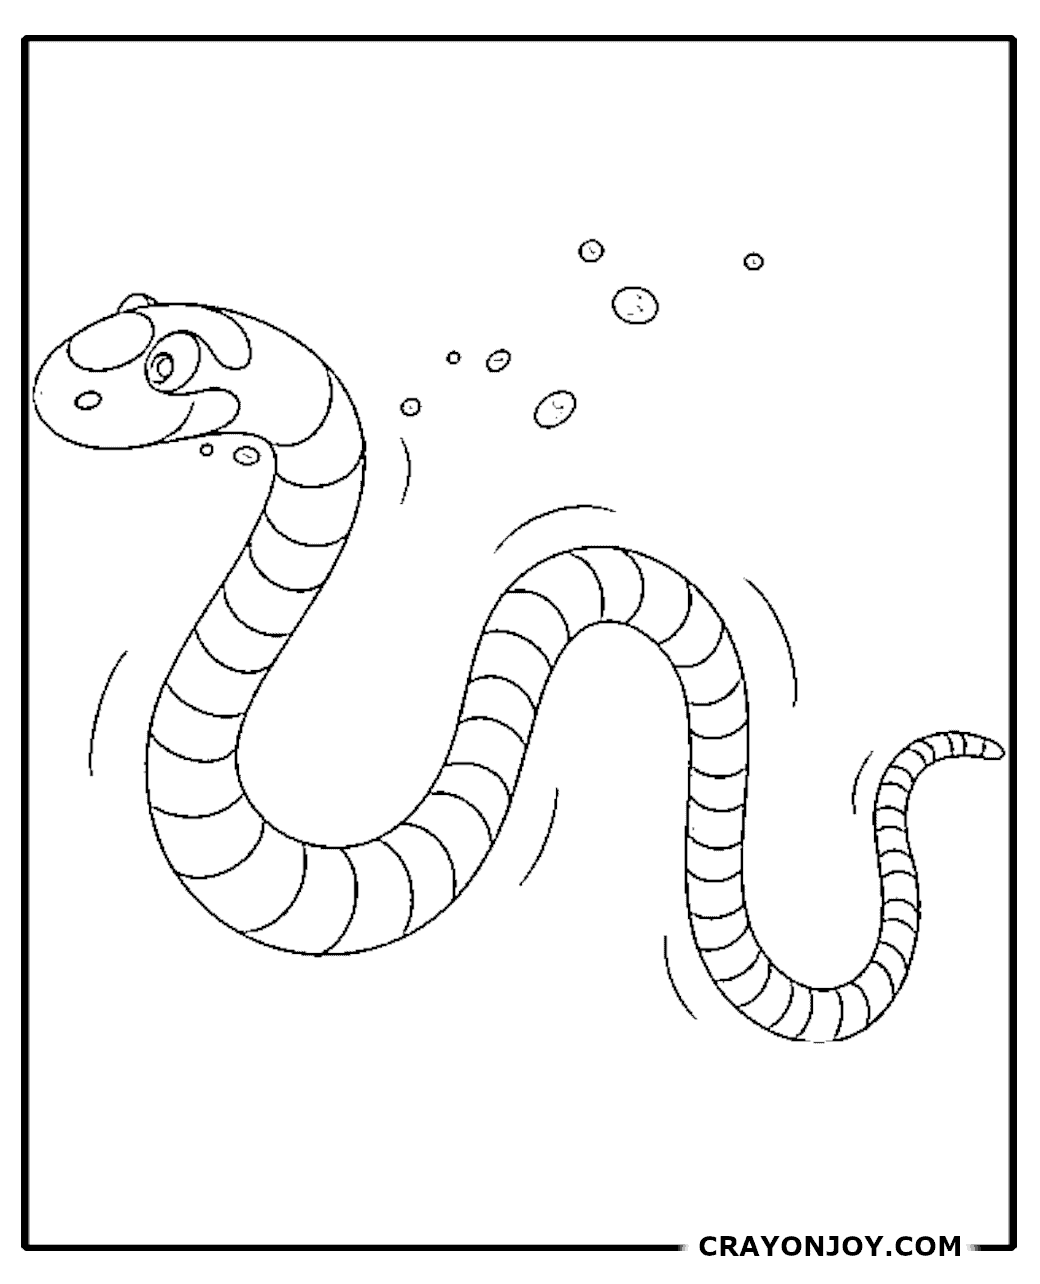 Free Printable Water Snake Coloring Pages